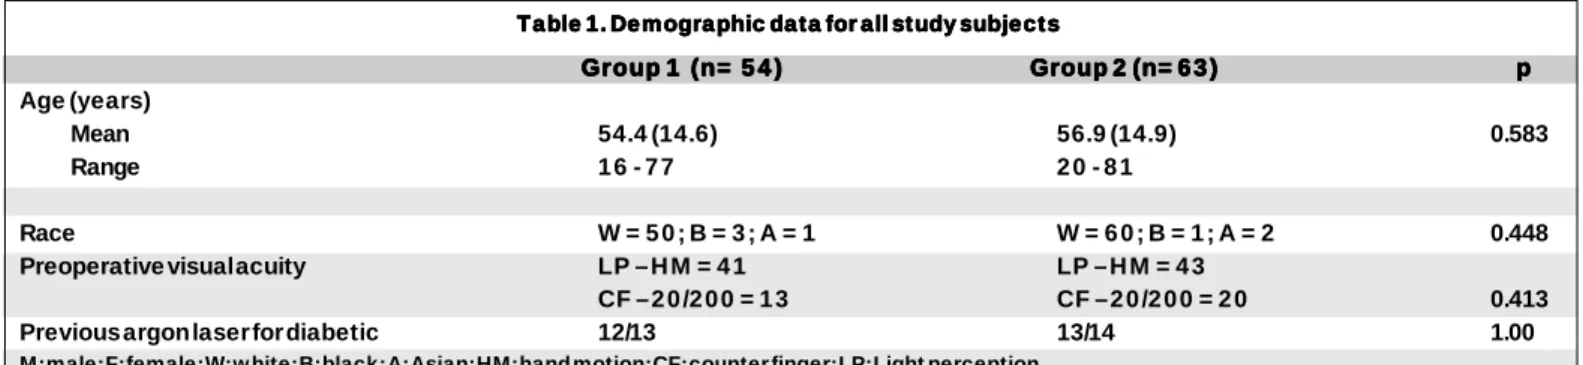 Table 1. Demographic data for all study subjectsTable 1. Demographic data for all study subjectsTable 1